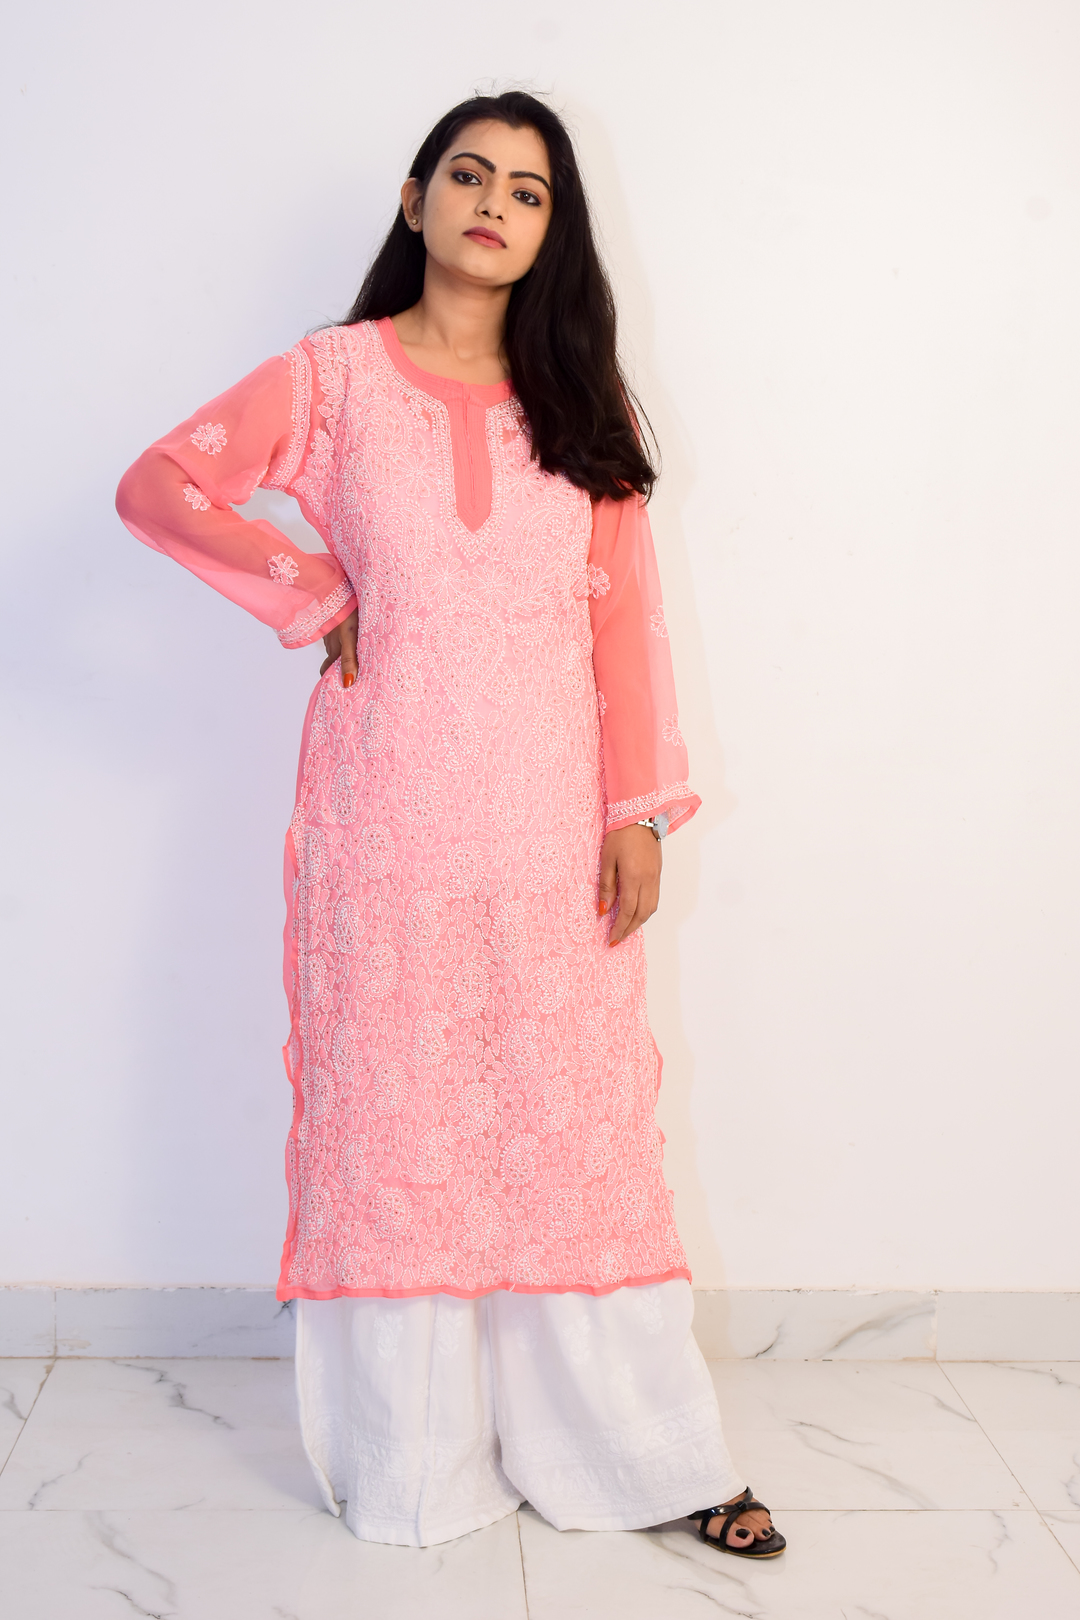 Buy Hand Embroidered Lucknowi Chikan Pink and White Georgette Kurti